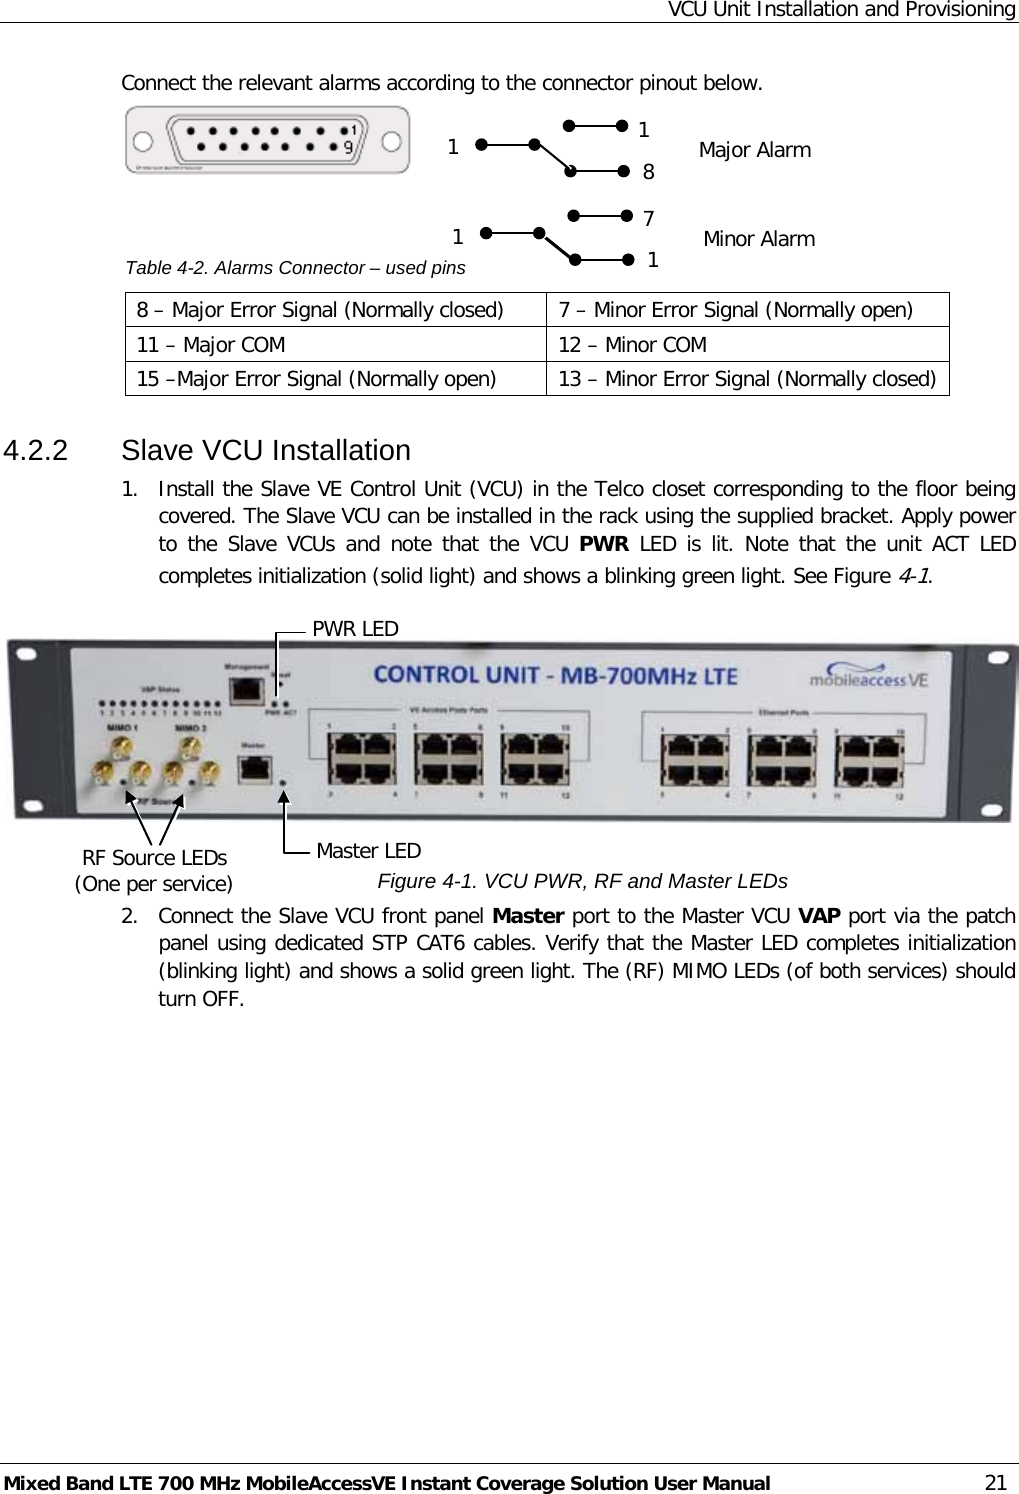 VCU Unit Installation and Provisioning Mixed Band LTE 700 MHz MobileAccessVE Instant Coverage Solution User Manual  21 Connect the relevant alarms according to the connector pinout below.     Table  4-2. Alarms Connector – used pins 8 – Major Error Signal (Normally closed)  7 – Minor Error Signal (Normally open) 11 – Major COM  12 – Minor COM 15 –Major Error Signal (Normally open) 13 – Minor Error Signal (Normally closed) 4.2.2  Slave VCU Installation 1.  Install the Slave VE Control Unit (VCU) in the Telco closet corresponding to the floor being covered. The Slave VCU can be installed in the rack using the supplied bracket. Apply power to the Slave VCUs and note that the VCU  PWR  LED is lit.  Note that the unit ACT LED completes initialization (solid light) and shows a blinking green light. See Figure  4-1.          Figure  4-1. VCU PWR, RF and Master LEDs 2.  Connect the Slave VCU front panel Master port to the Master VCU VAP port via the patch panel using dedicated STP CAT6 cables. Verify that the Master LED completes initialization (blinking light) and shows a solid green light. The (RF) MIMO LEDs (of both services) should turn OFF.  1 1 8  Major Alarm 1 7 1 Minor Alarm PWR LED   Master LED  RF Source LEDs  (One per service) 